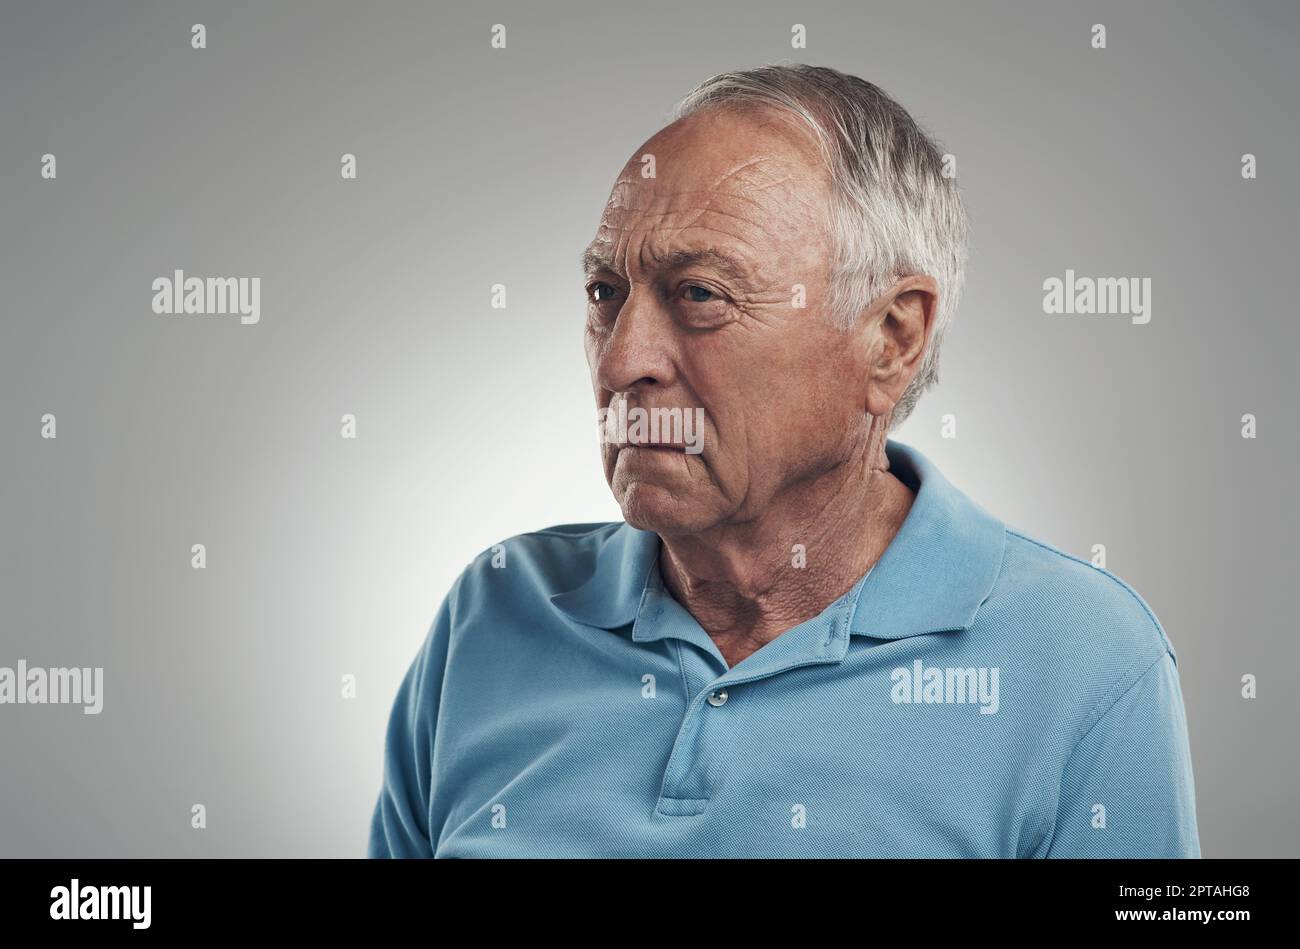 Today was a hard day. an older man looking off into the distance in a studio against a grey background Stock Photo